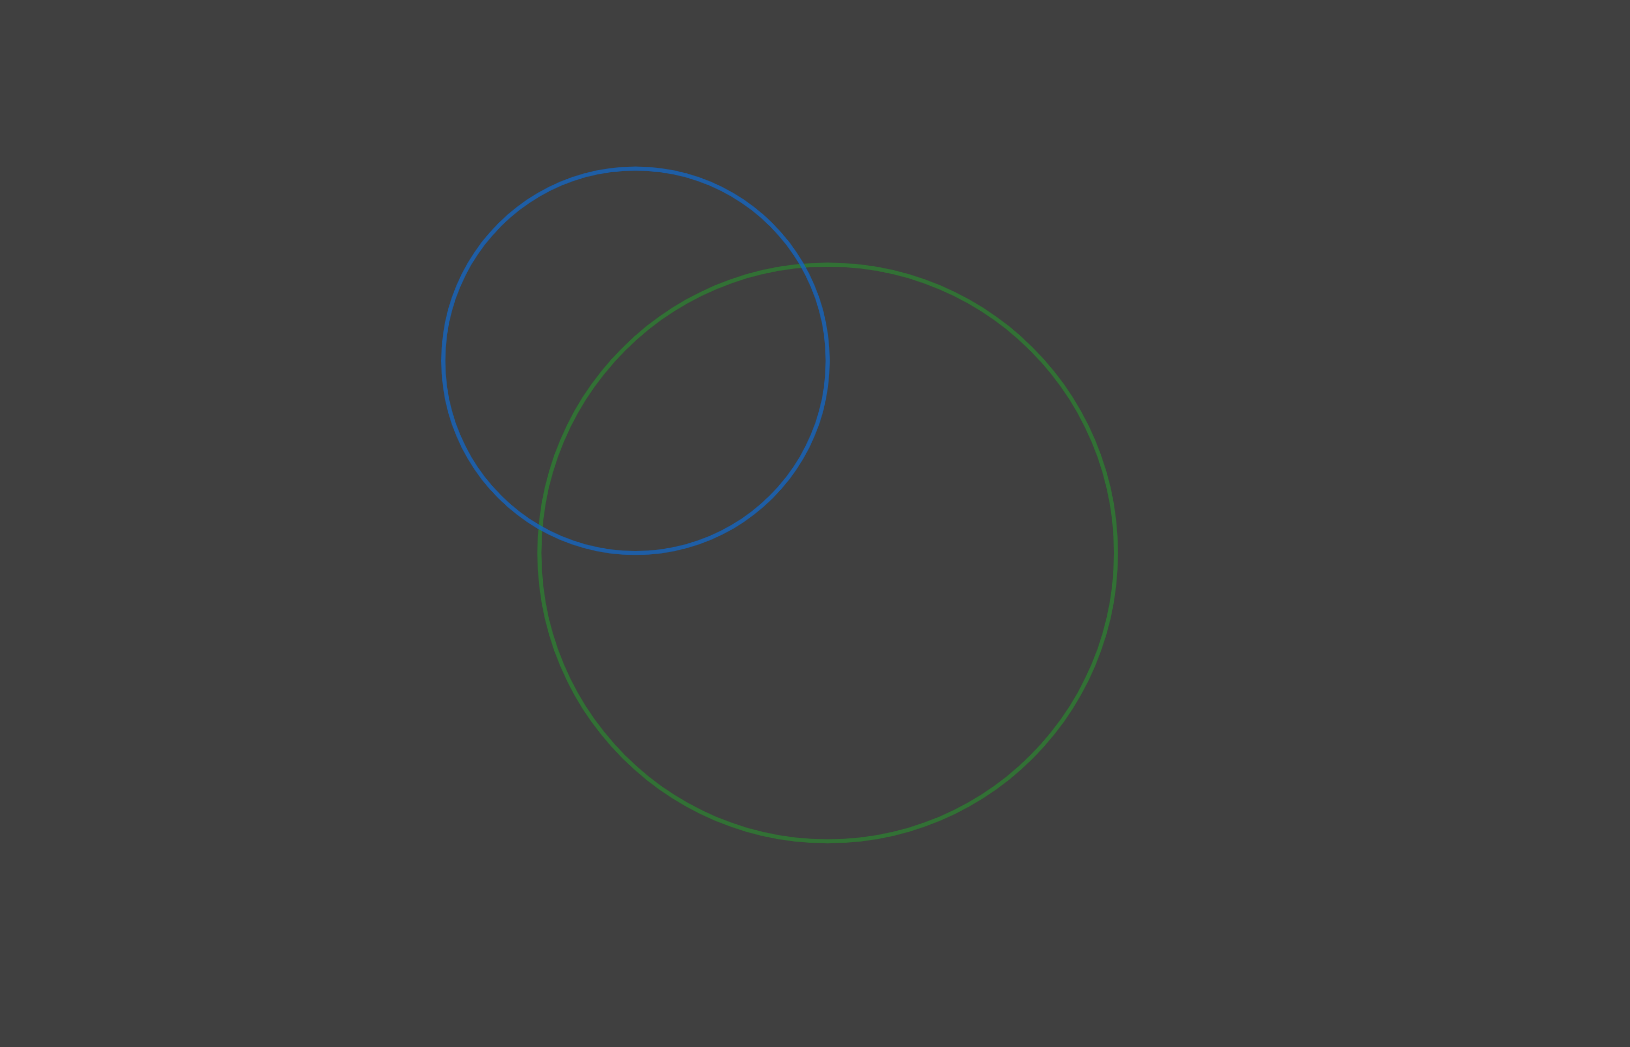 Simulate two circles with difference sizes